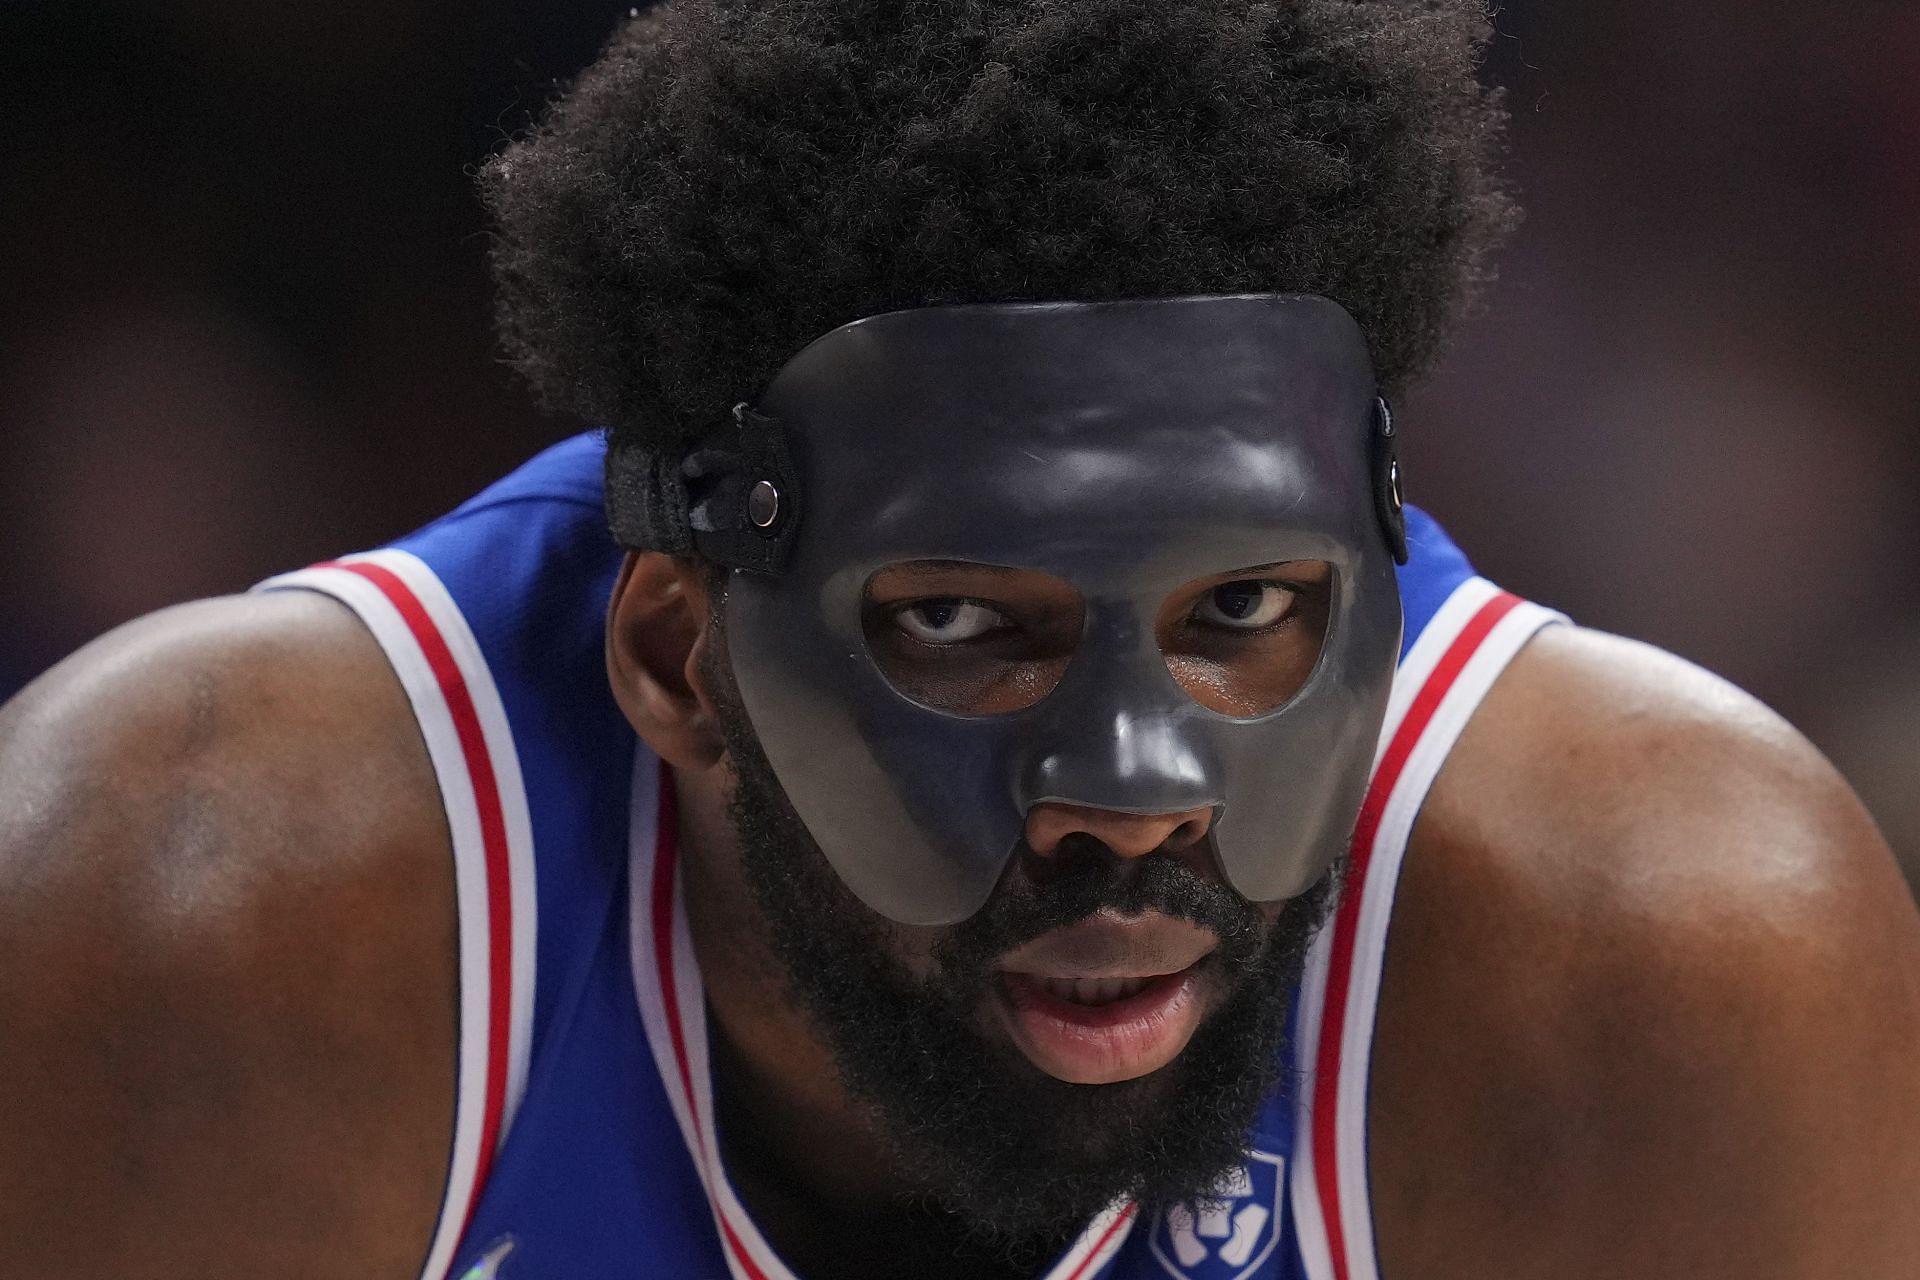 Sixers vs Heat: Joel Embiid's mask has never been made before 